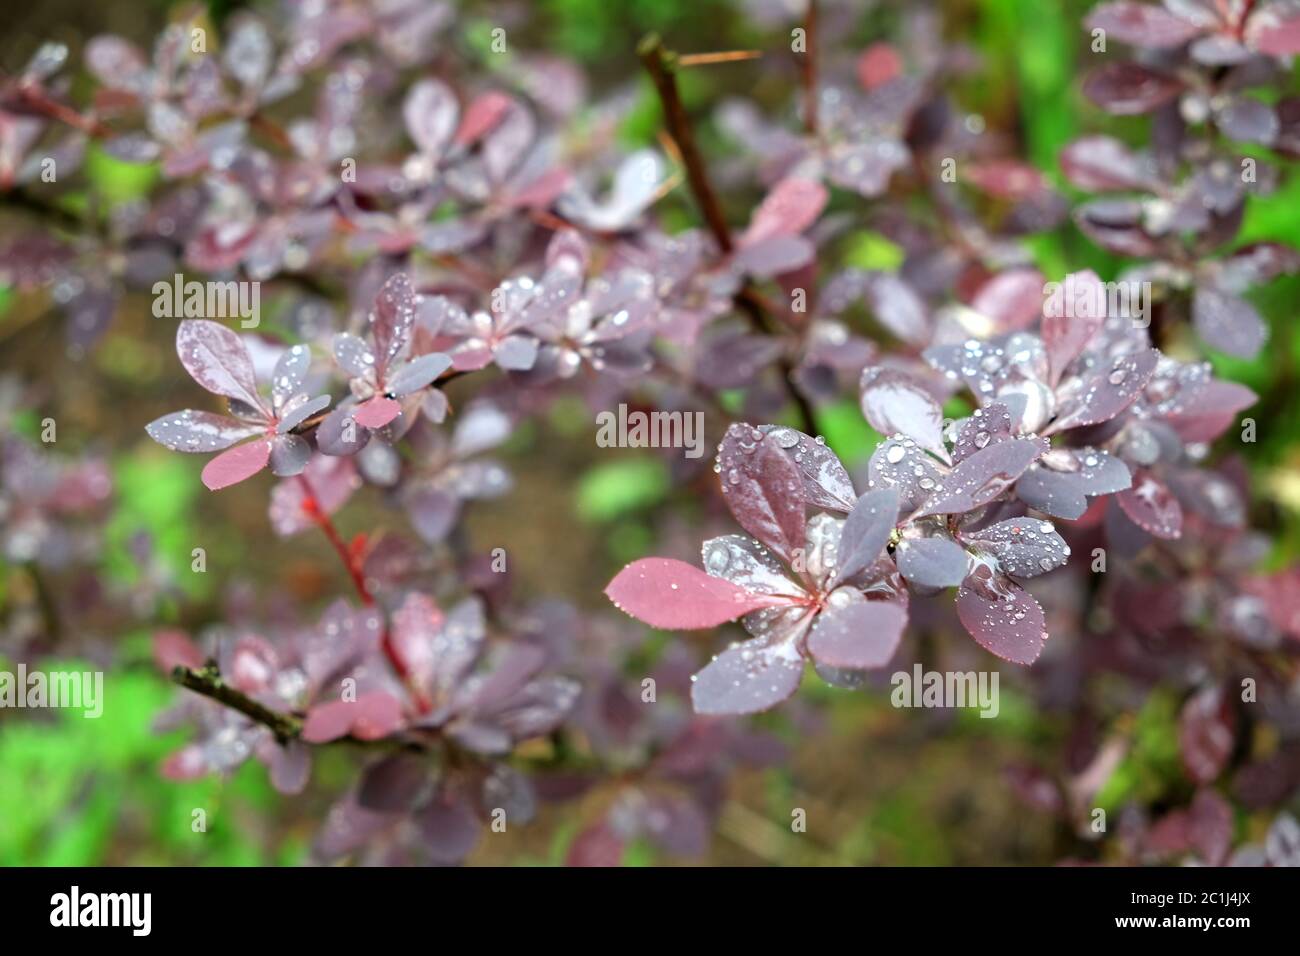 Barberry bush with many wet leaves on the branches grow in the garden view after rain Stock Photo